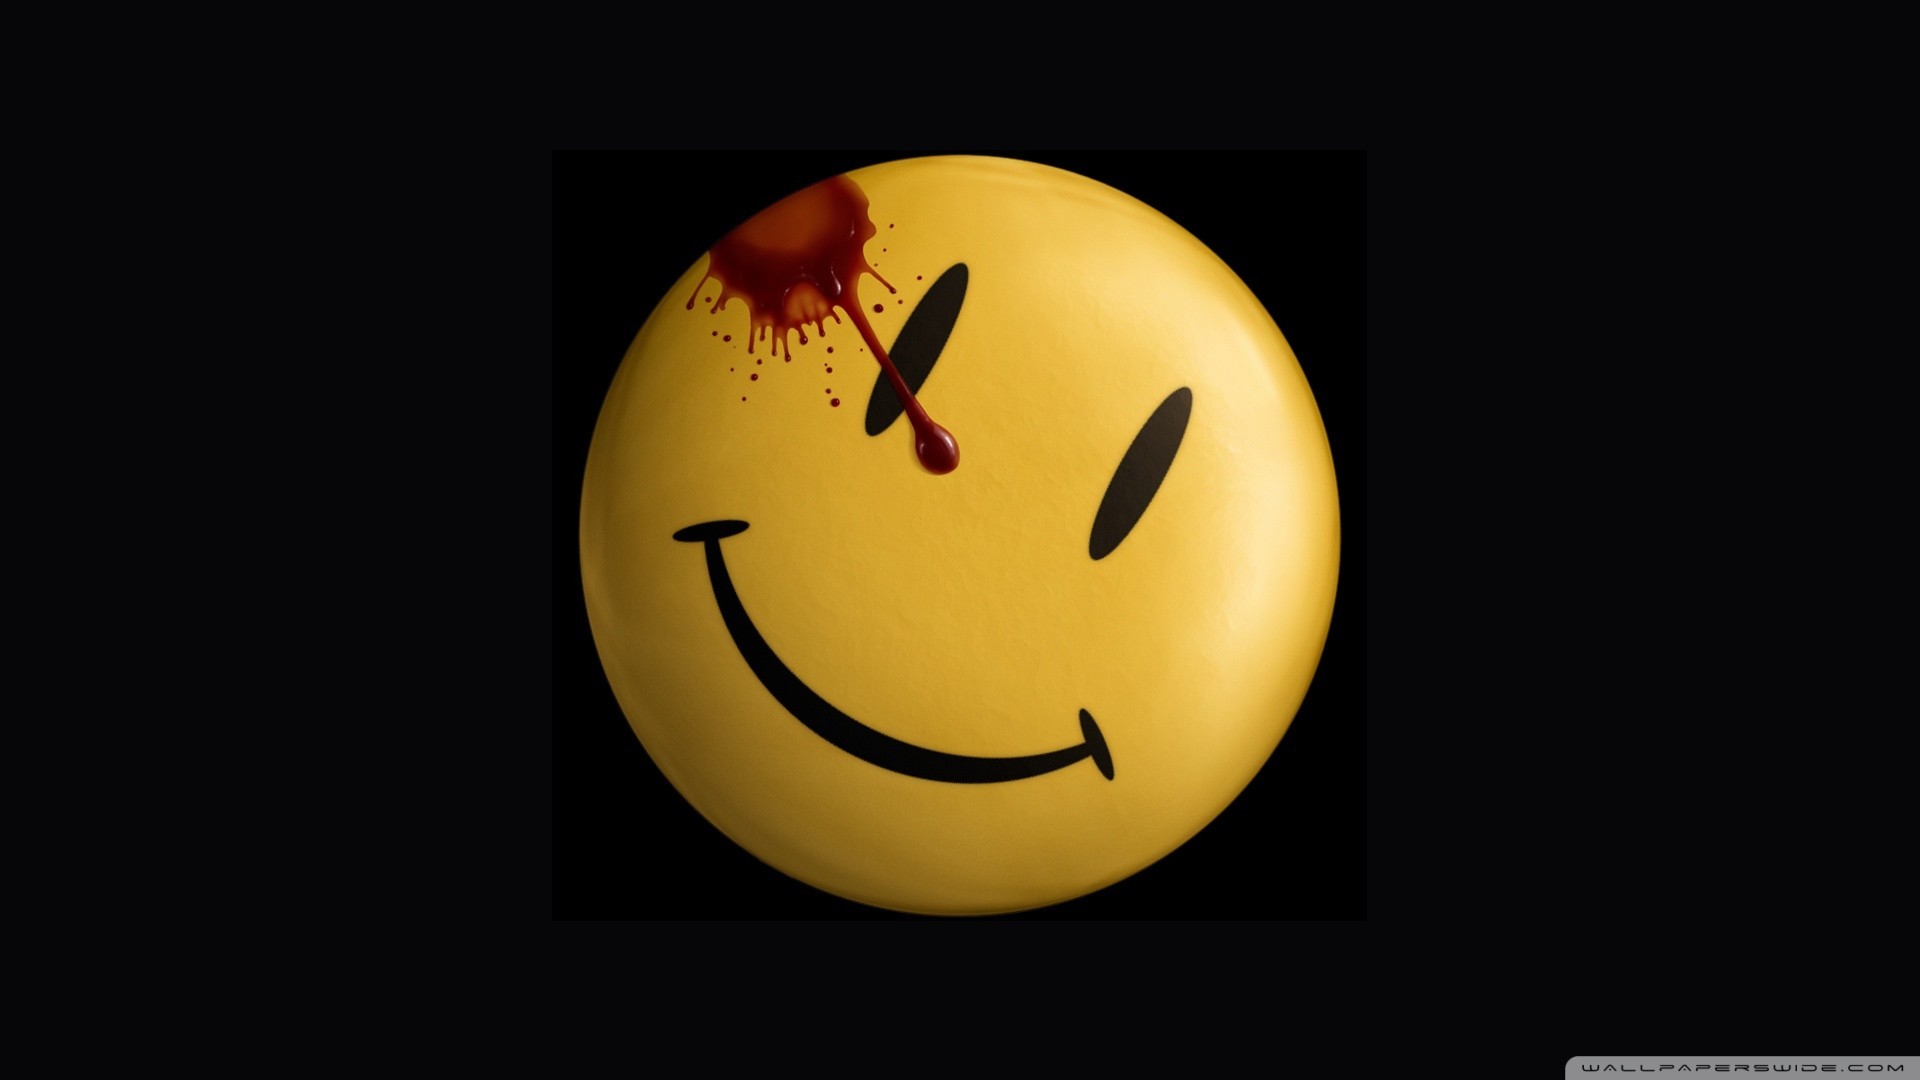 Smiley Face Black Background (36+ pictures)